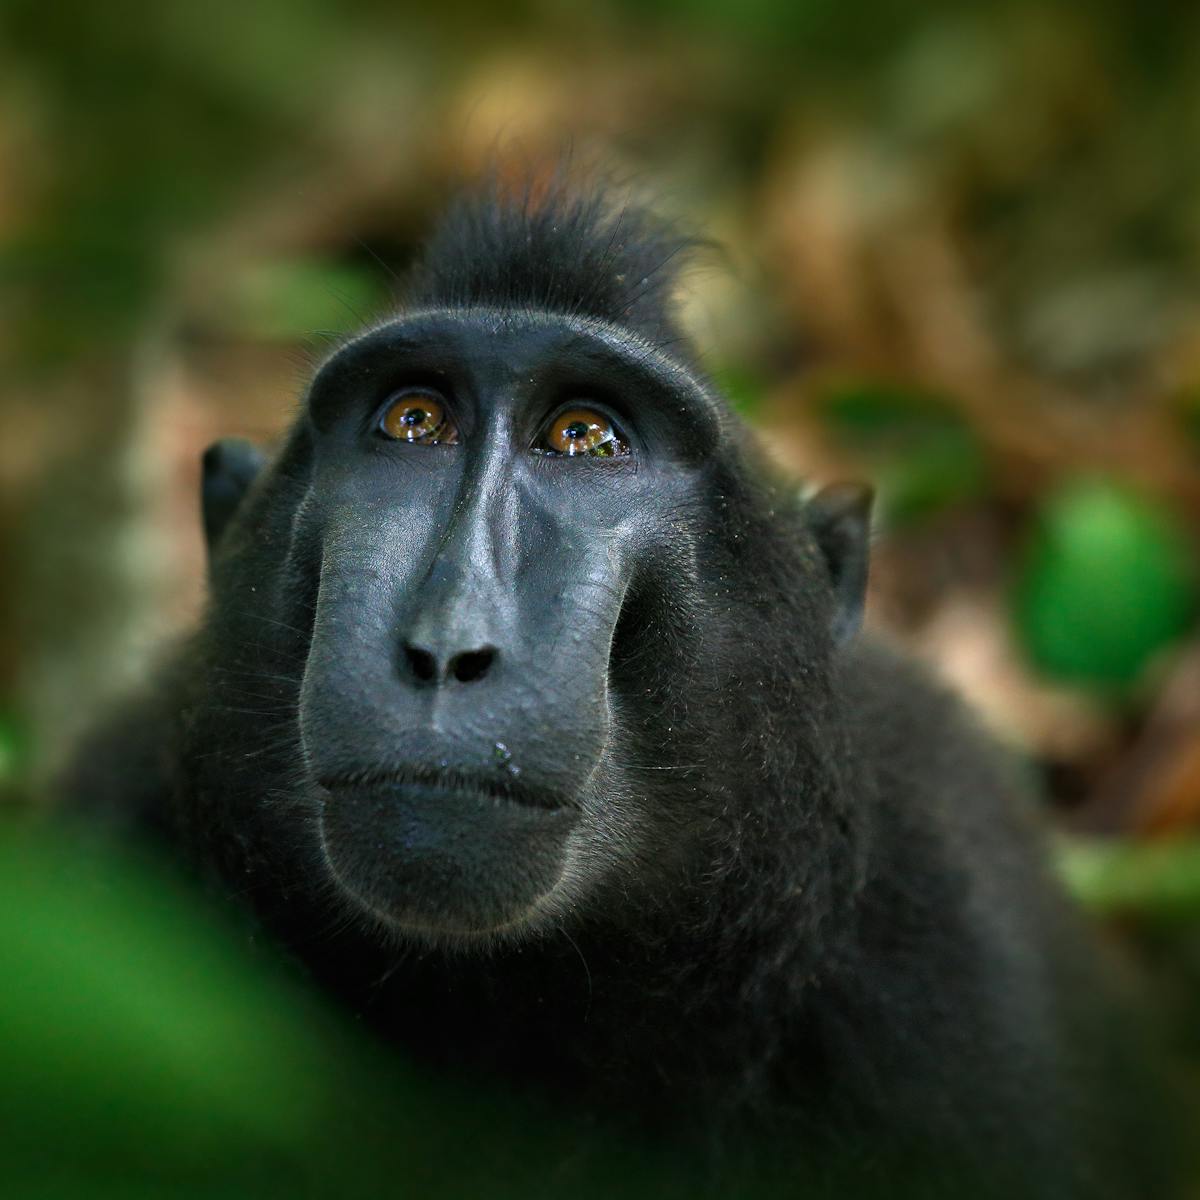 Monkey selfie case finally settled – but there are many similar animal  rights battles to come